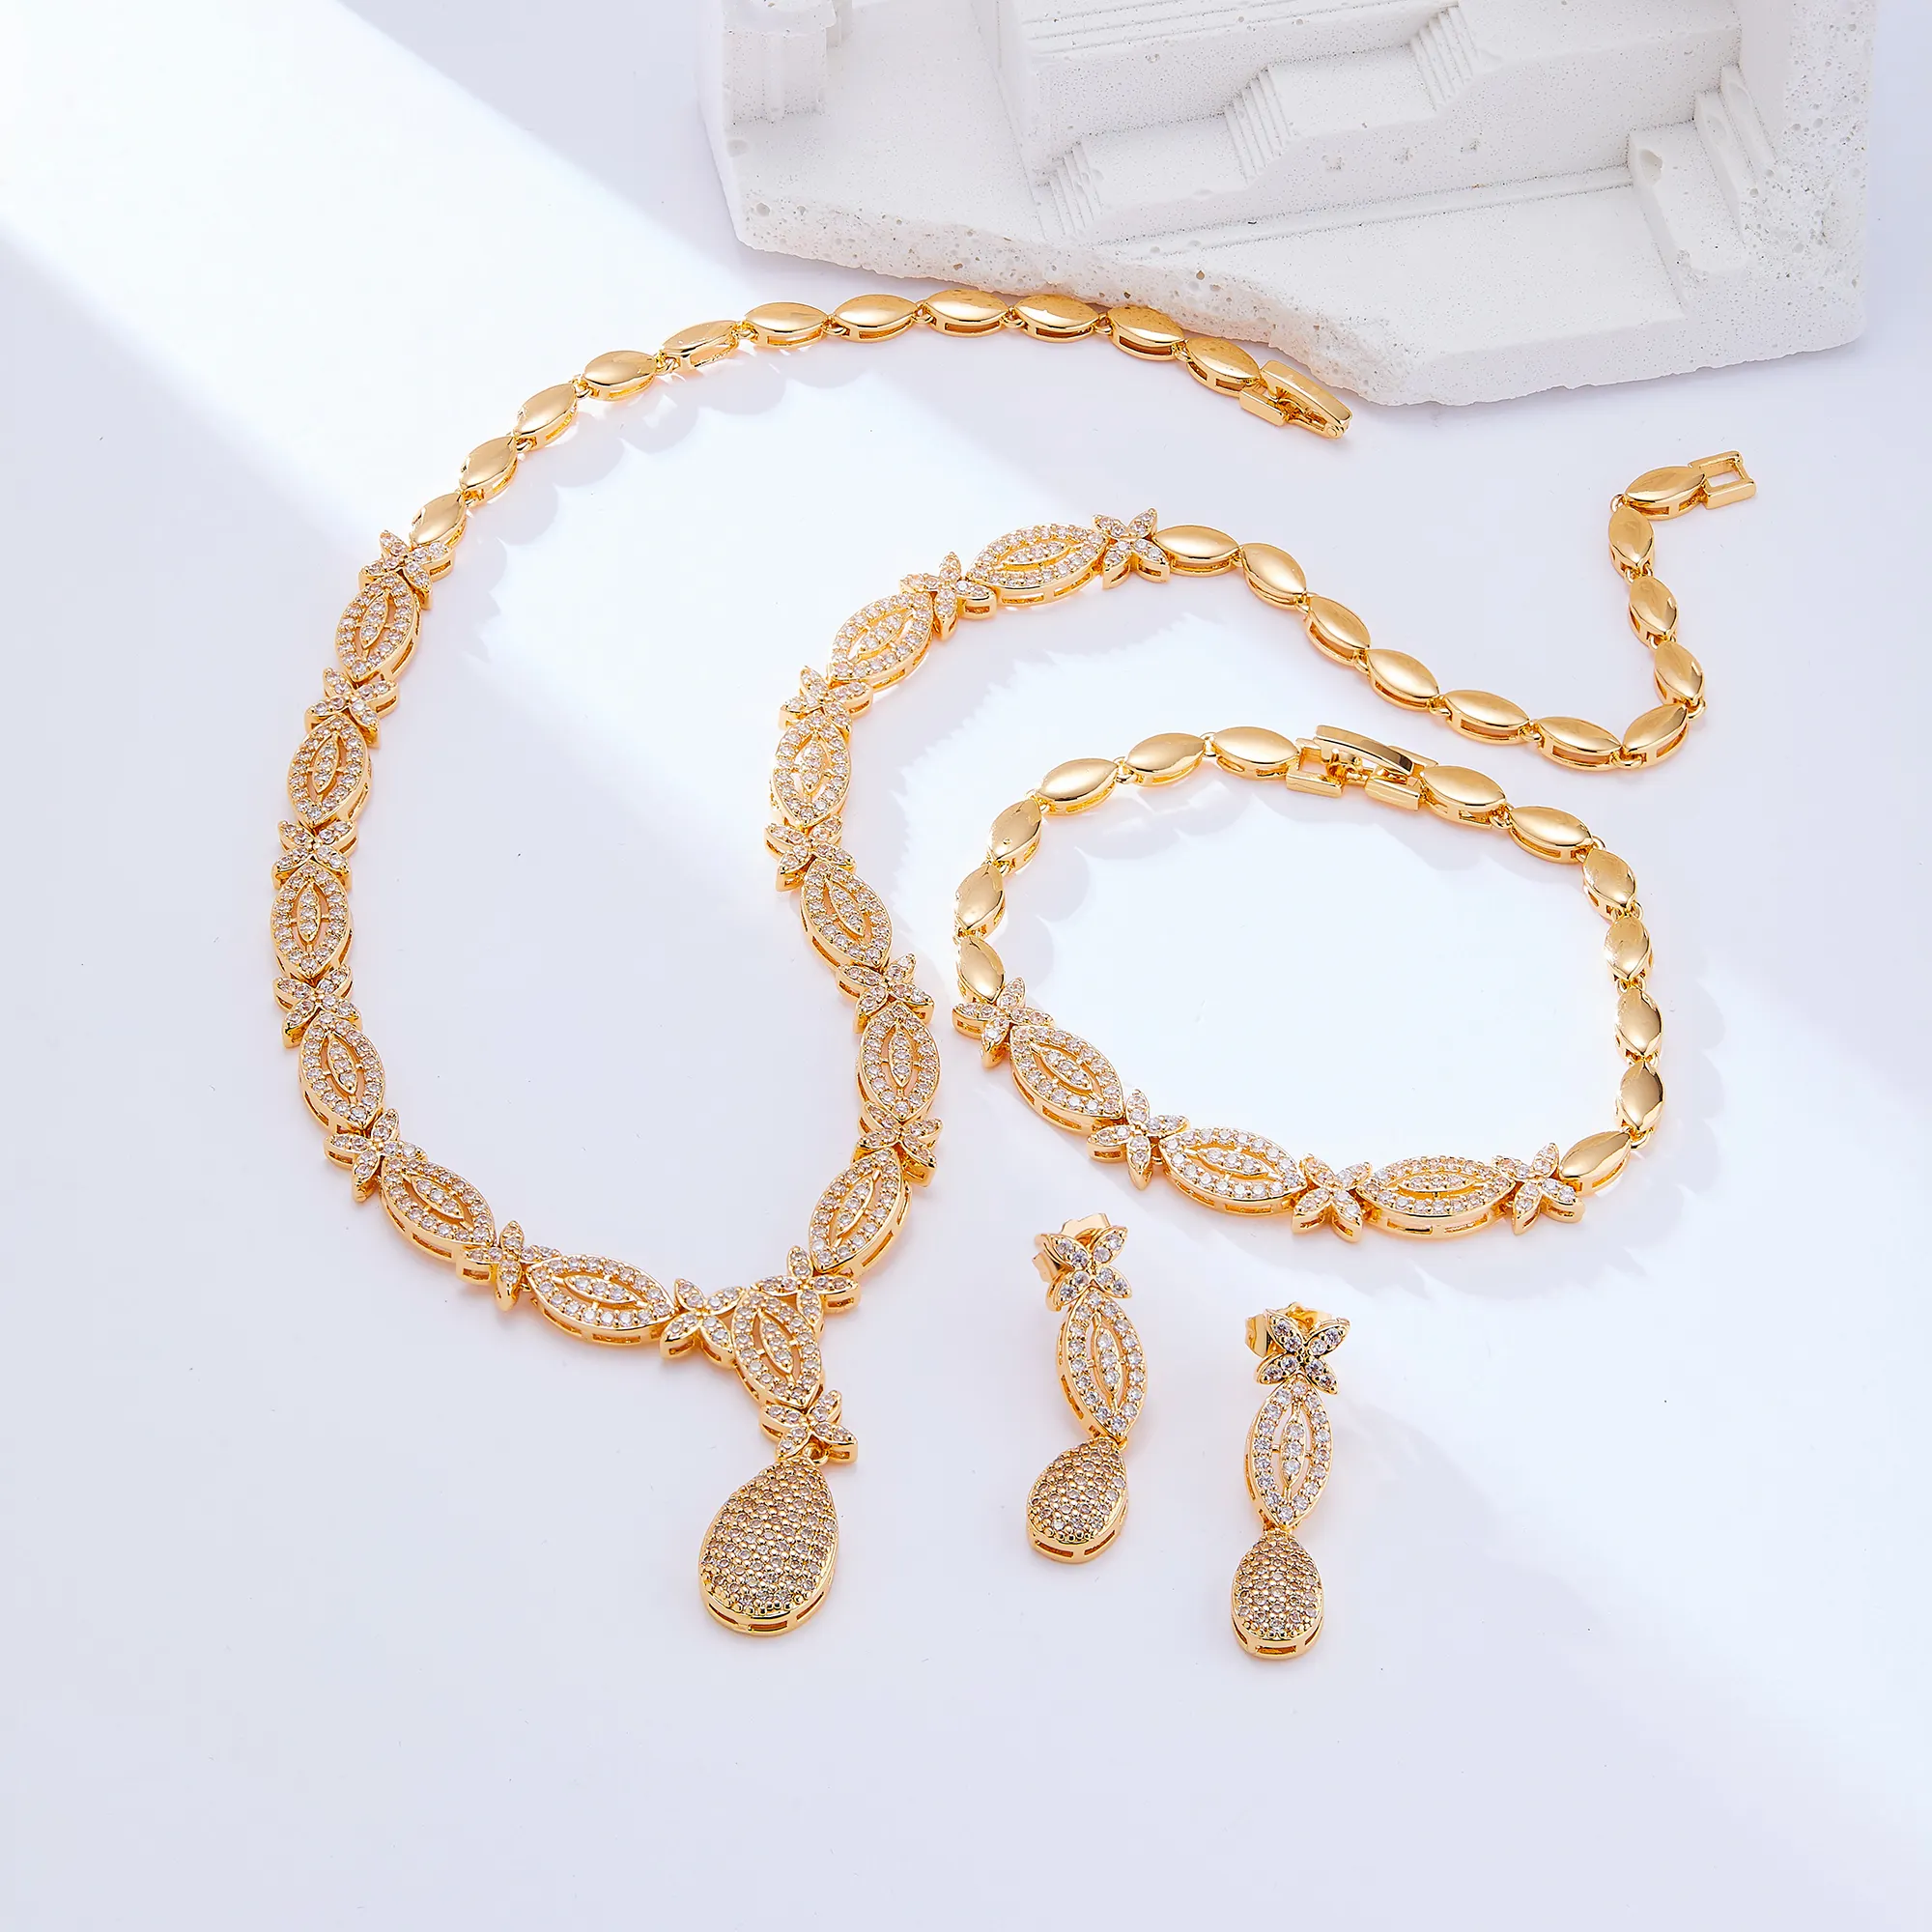 New Design Gold Plating Jewelry Sets Copper Necklace Earrings Set Fashion Jewellery Wholesale Women Party Dating Gift